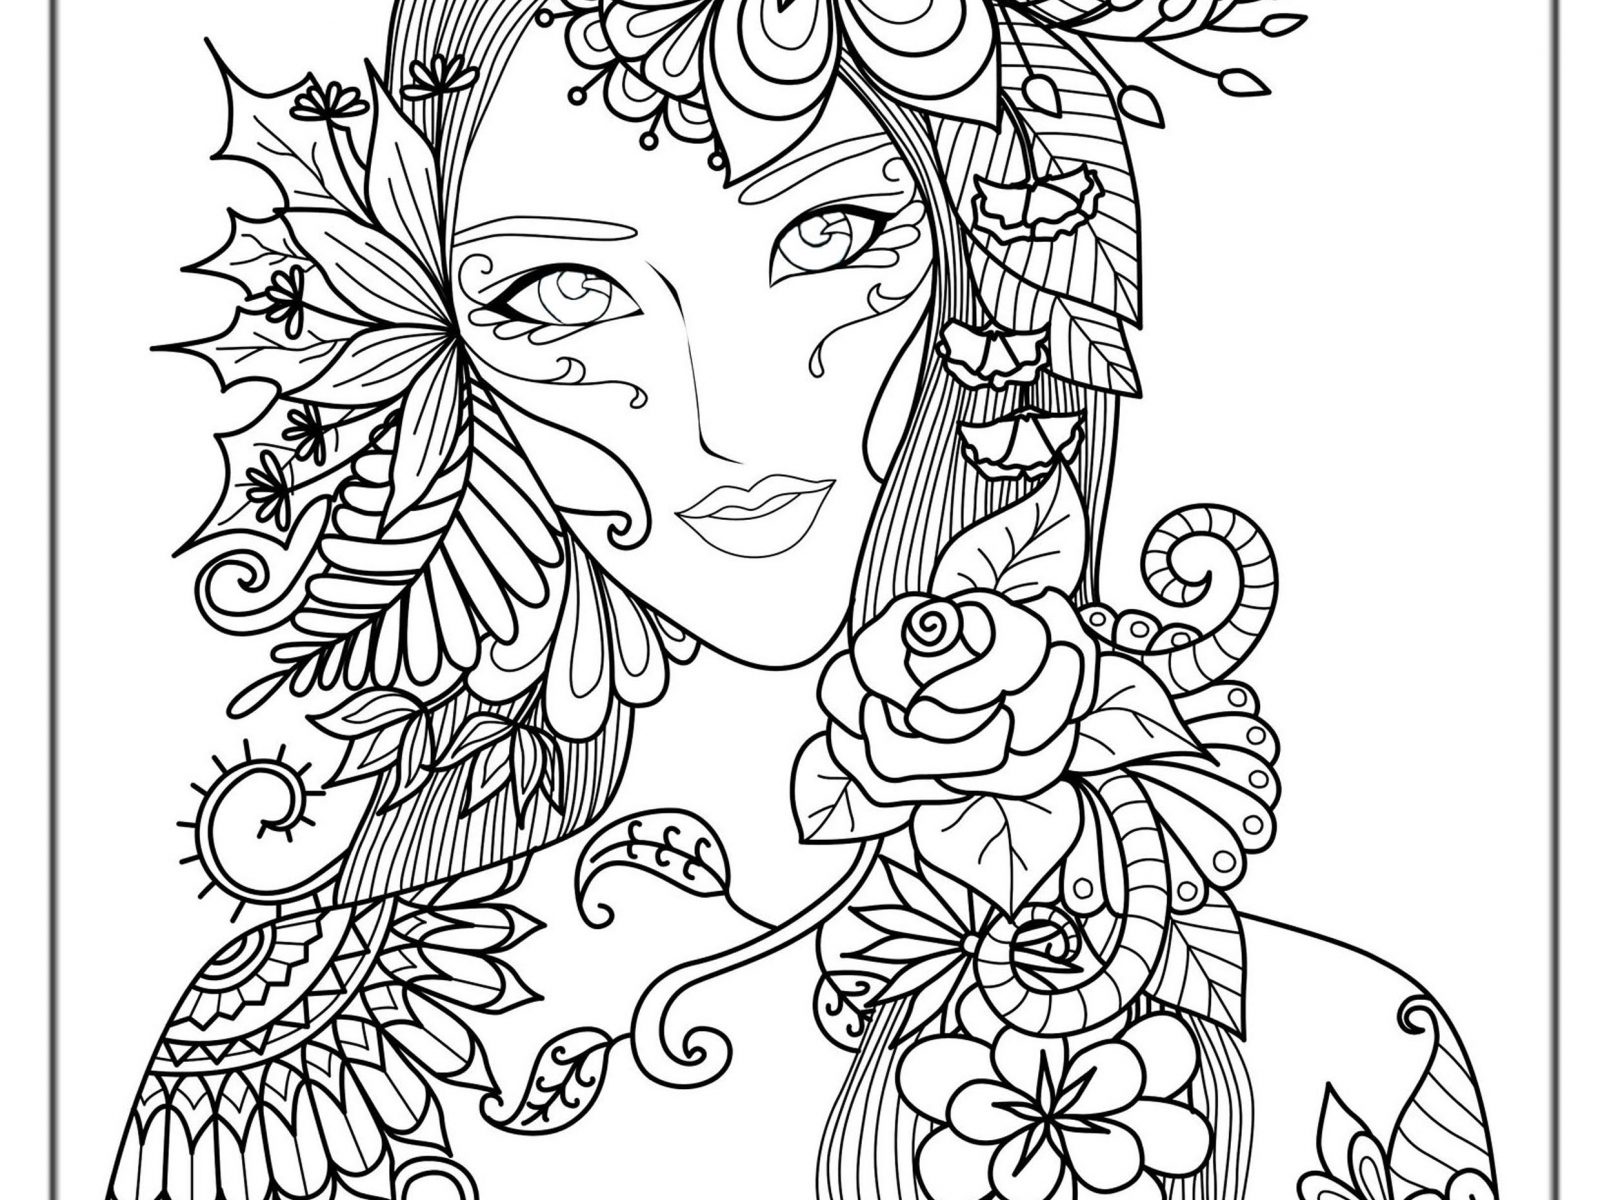 Really Hard Coloring Pages For Adults at GetColorings.com | Free